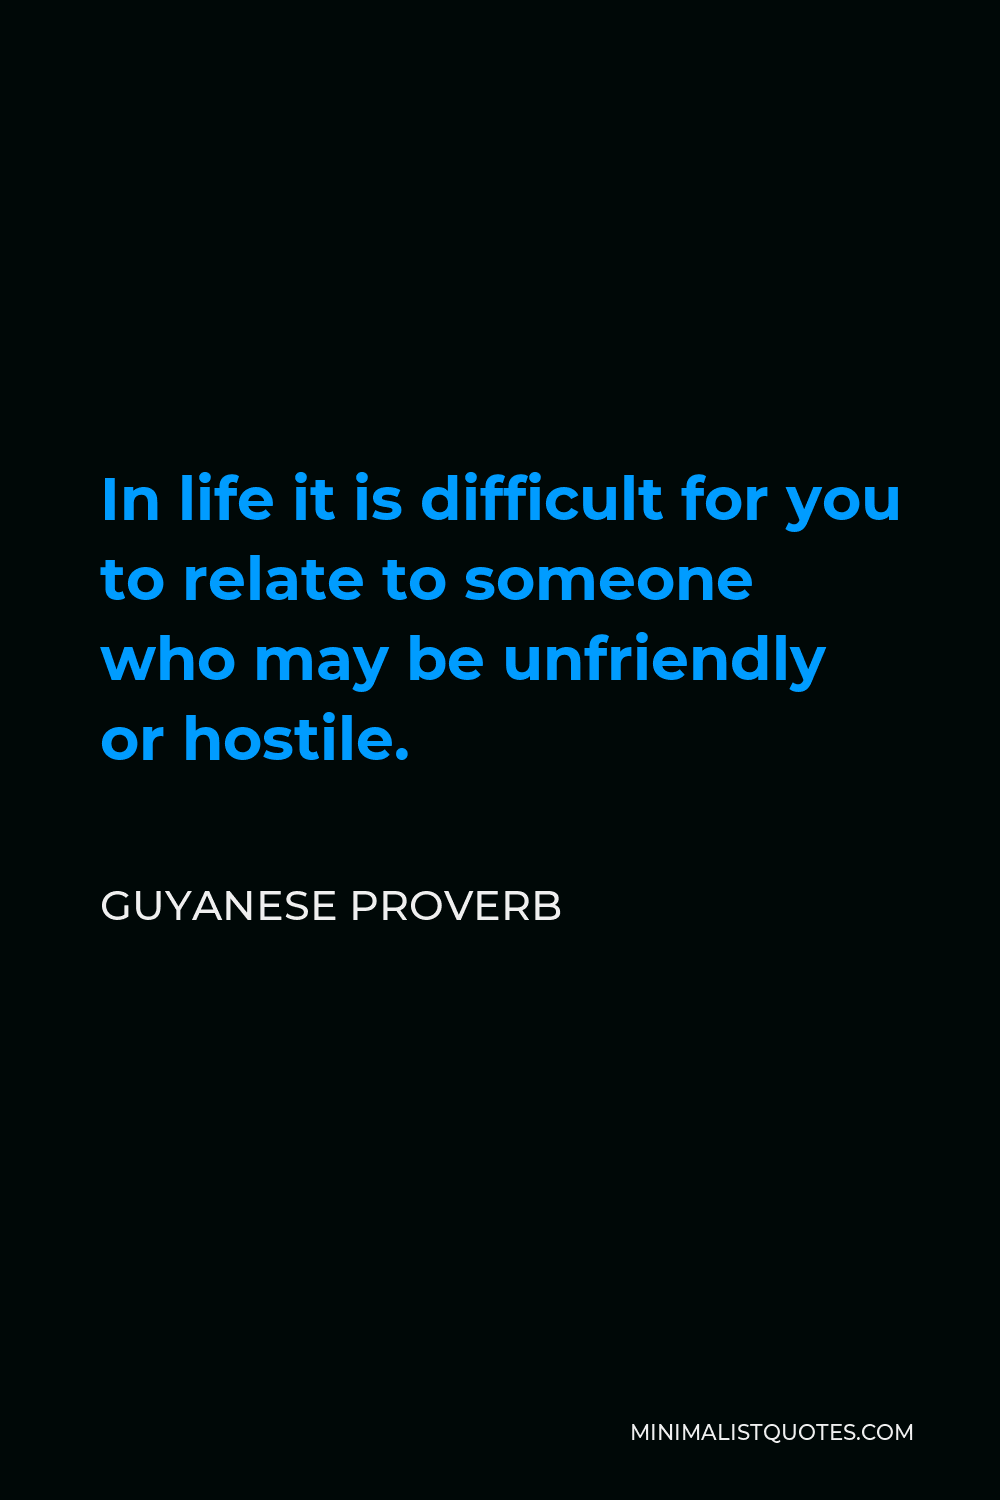 Guyanese Proverb Quote - In life it is difficult for you to relate to someone who may be unfriendly or hostile.